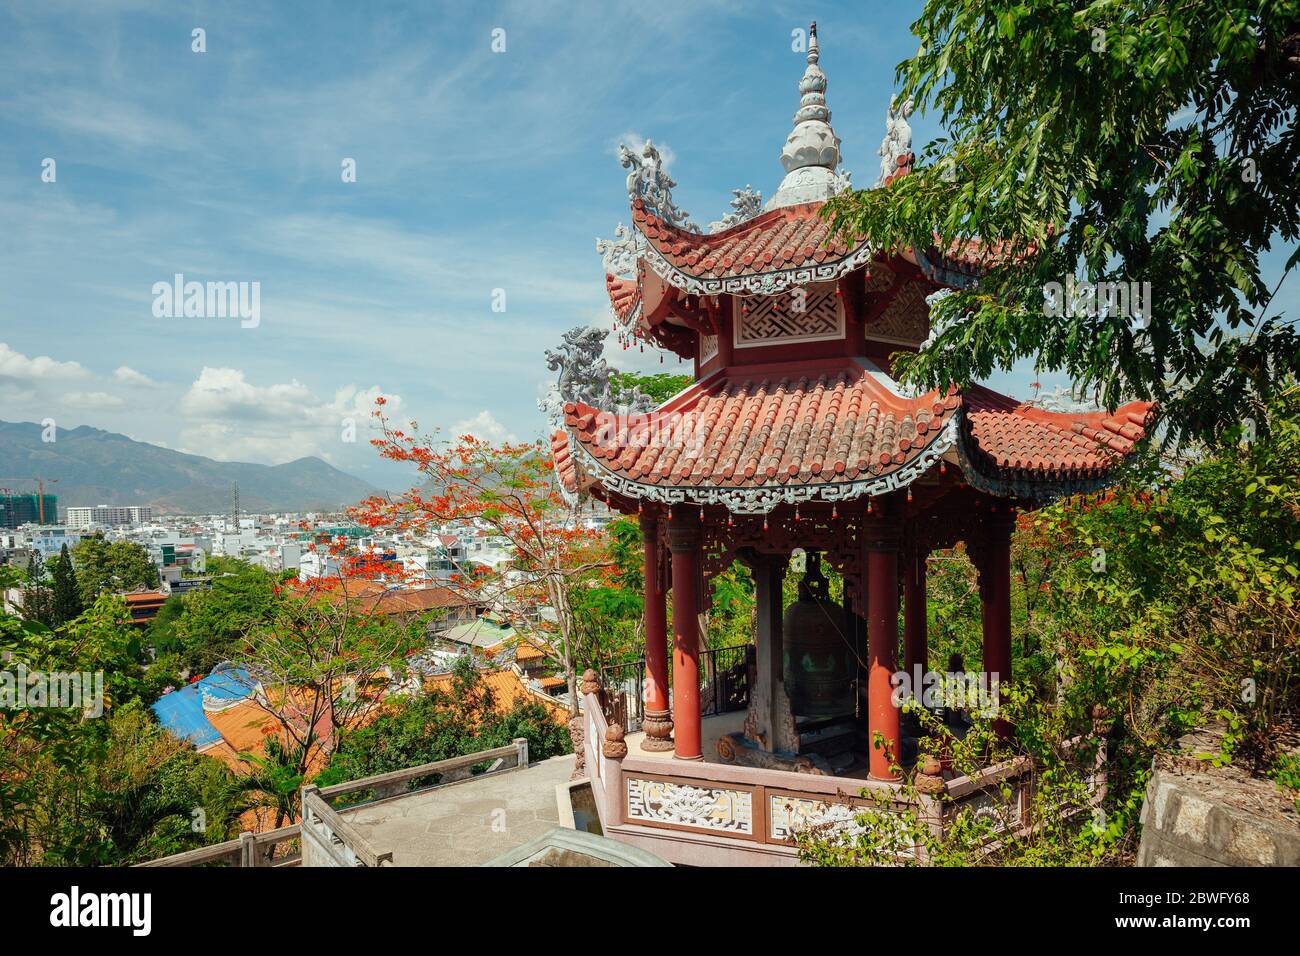 Giant prayer bell on the grounds of the Long Son Pagoda, Nha Trang, Vietnam Stock Photo